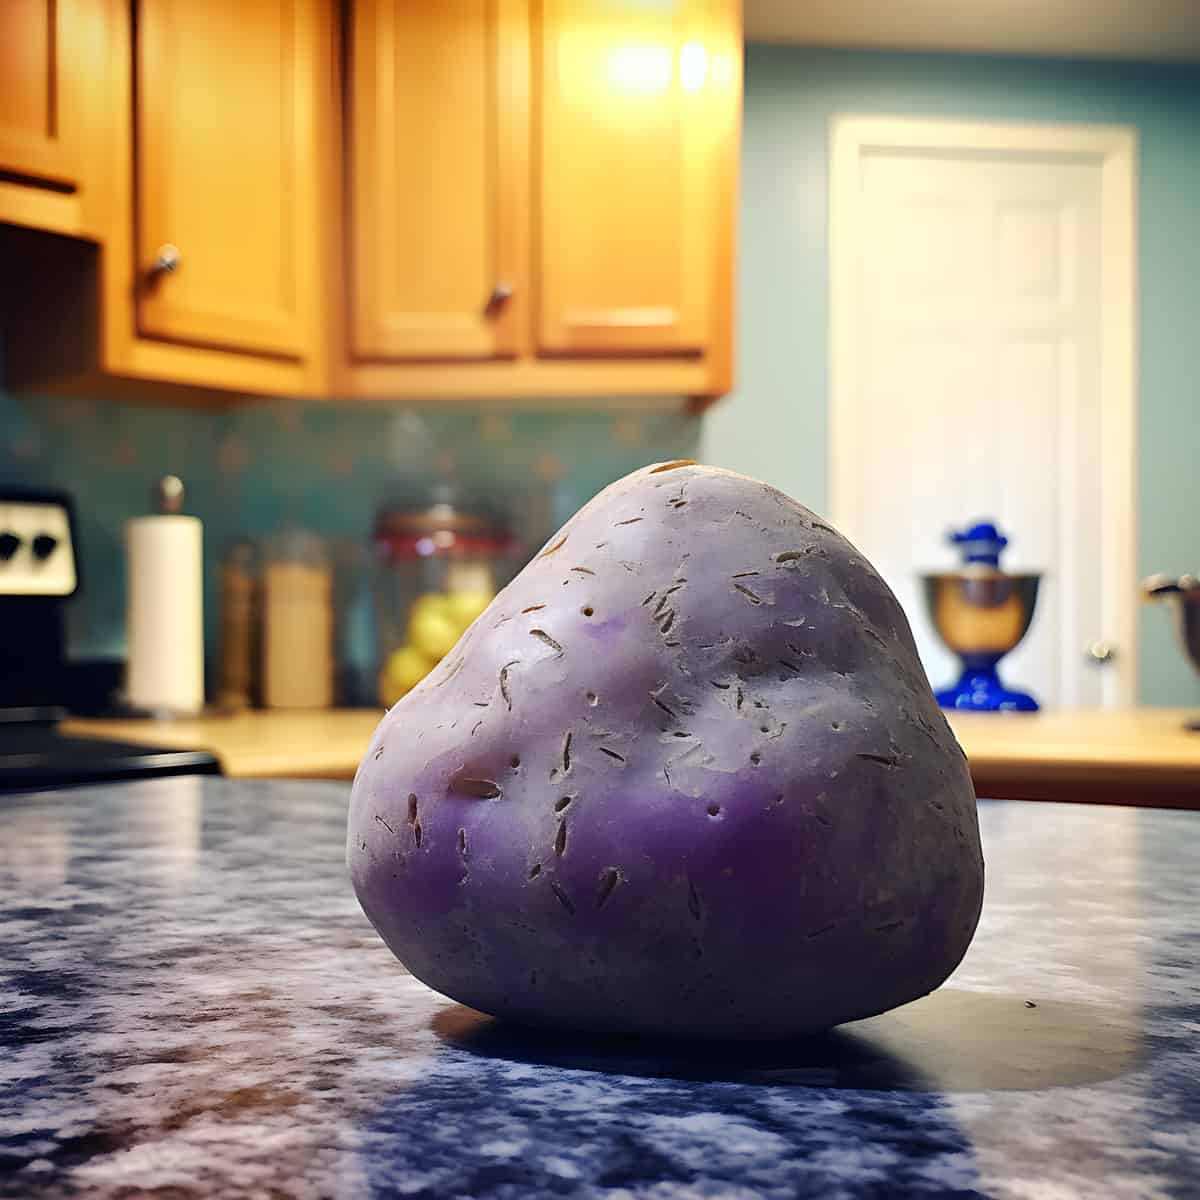 Russian Blue Potatoes on a kitchen counter